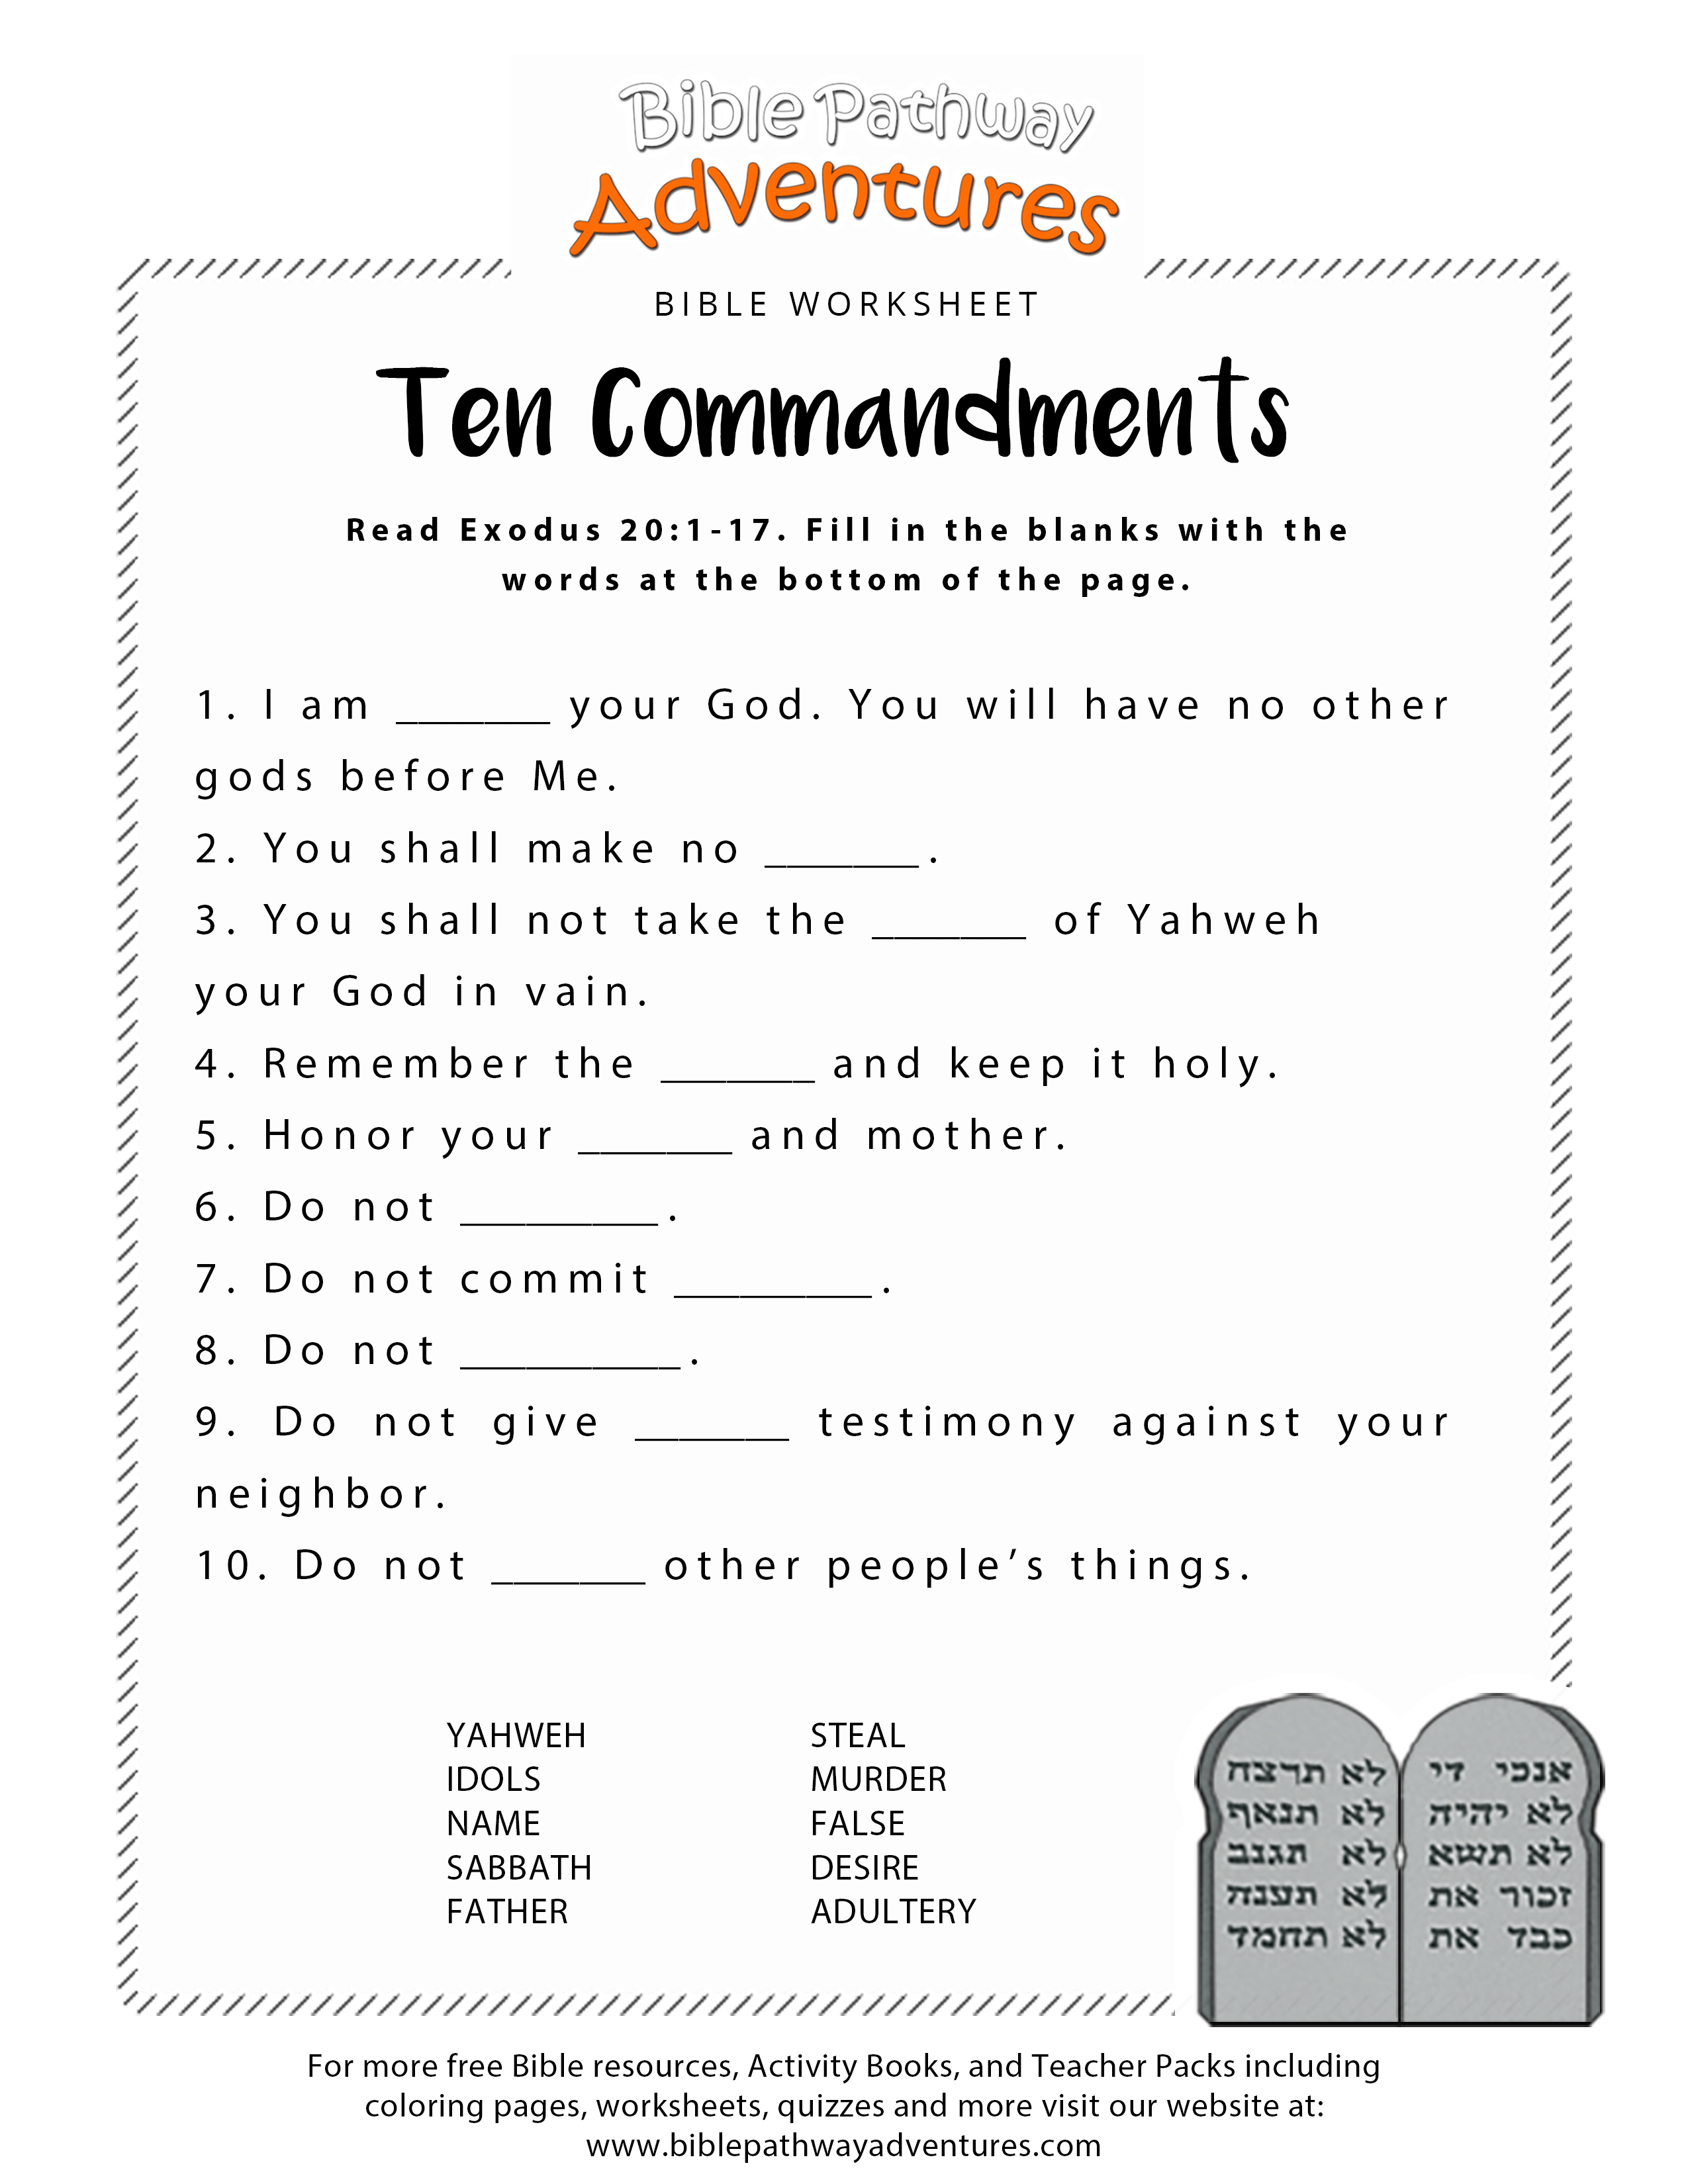 Free Printable Bible Worksheets For Youth – Worksheet Template | Bible Printable Worksheets